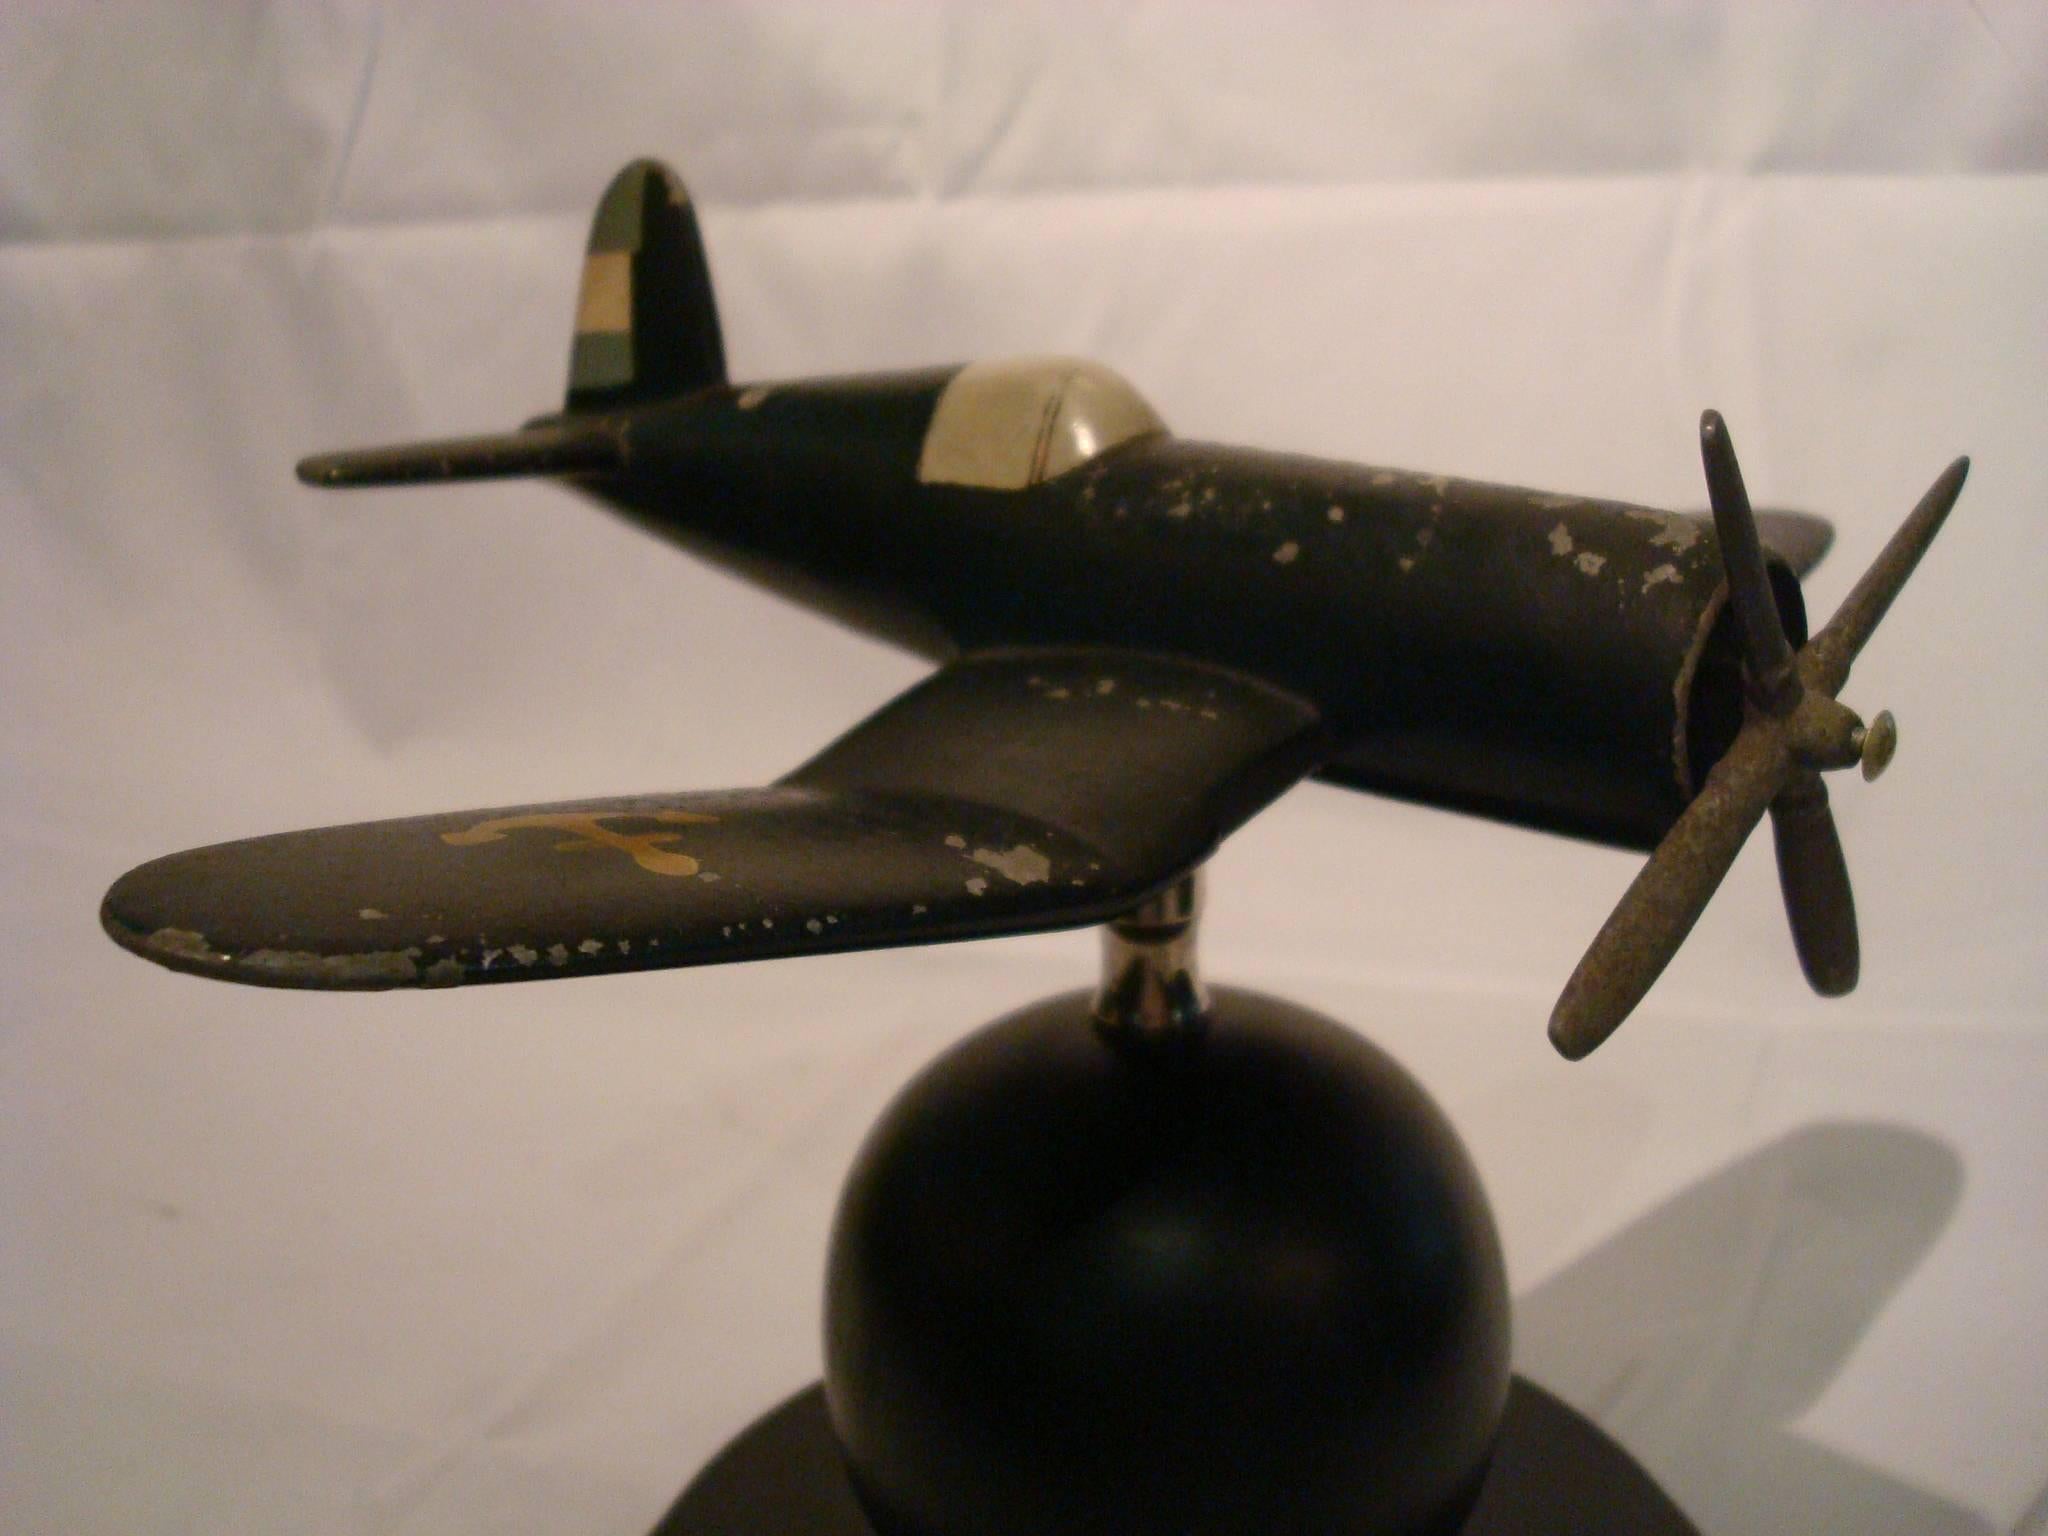 Art Deco airplane desk model Vought F4U Corsair, 1940s. The airplane has movement, can be regulated in many positions. The wooden base has been repolished. The airplane is in original conditions, with time wear.

The Vought F4U Corsair is an